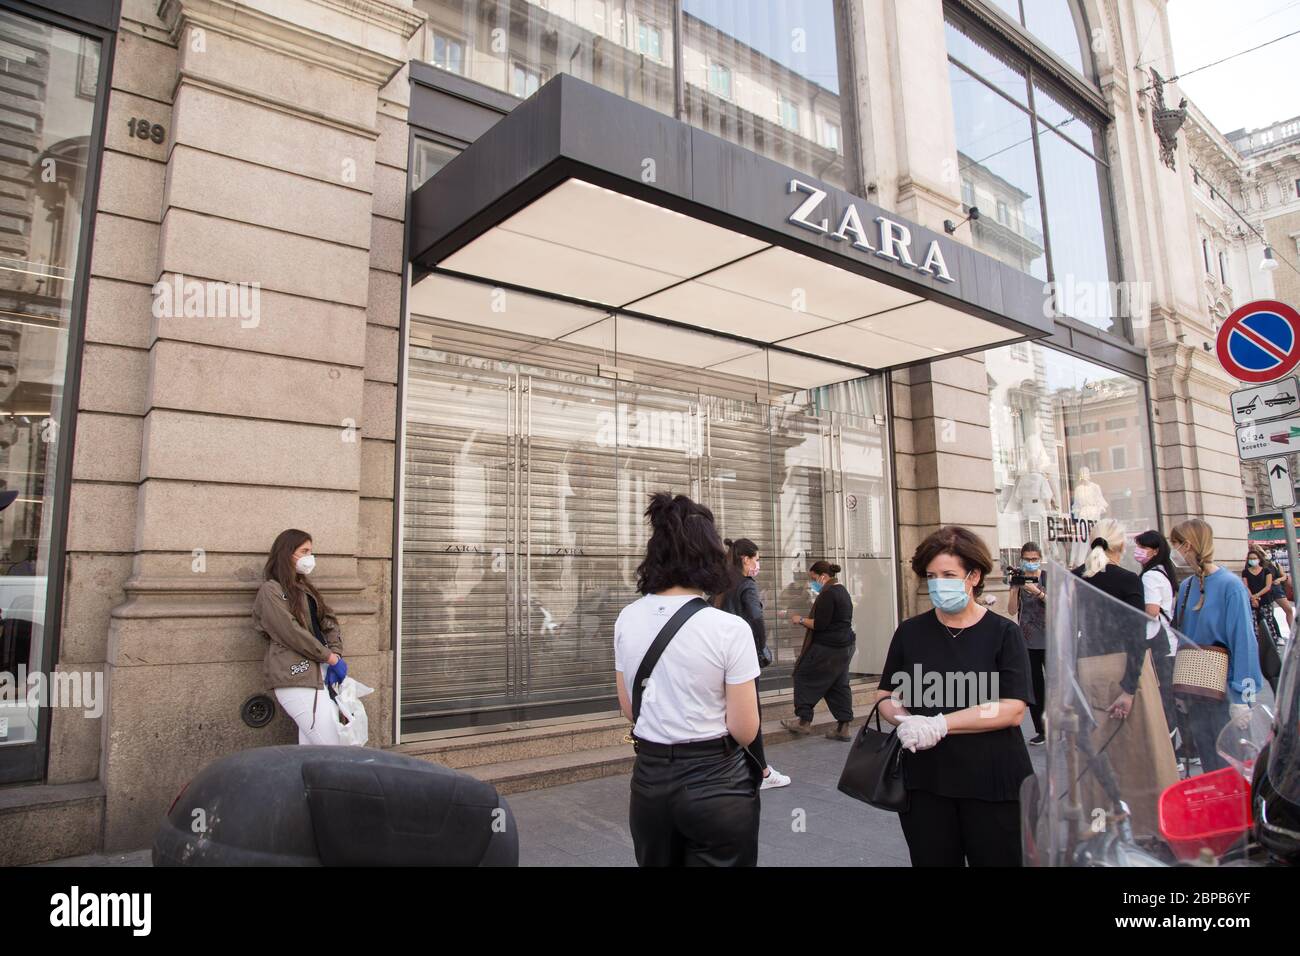 Rome, Italy. 18th May, 2020. People lined up in front of Zara store in Via  del